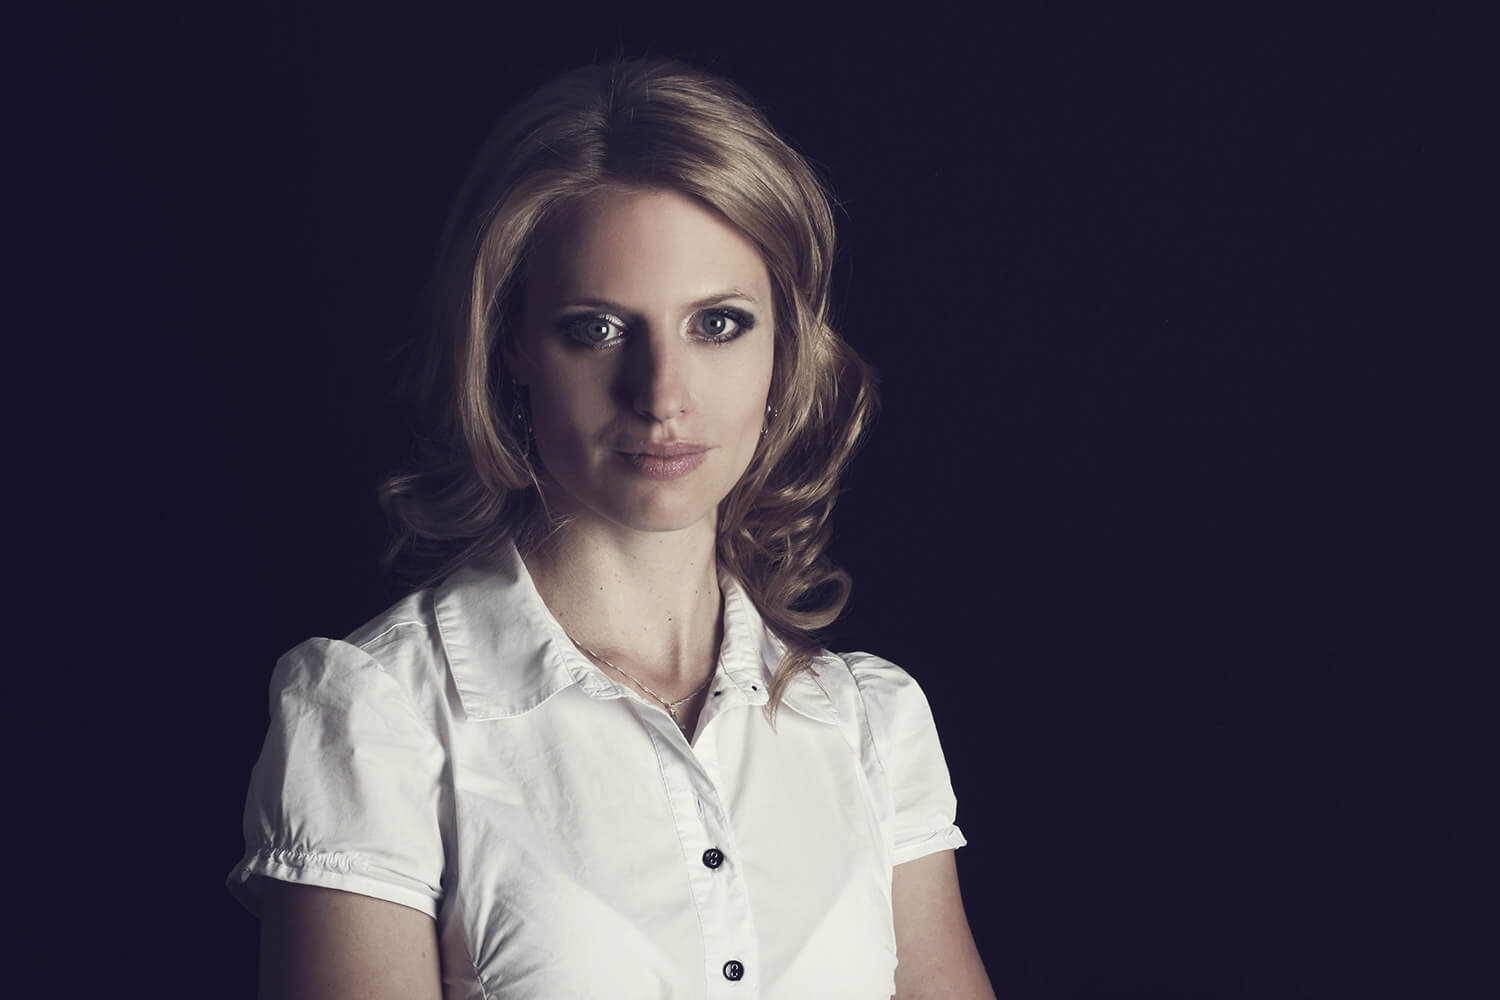 female business portrait in a white shirt on a dark background